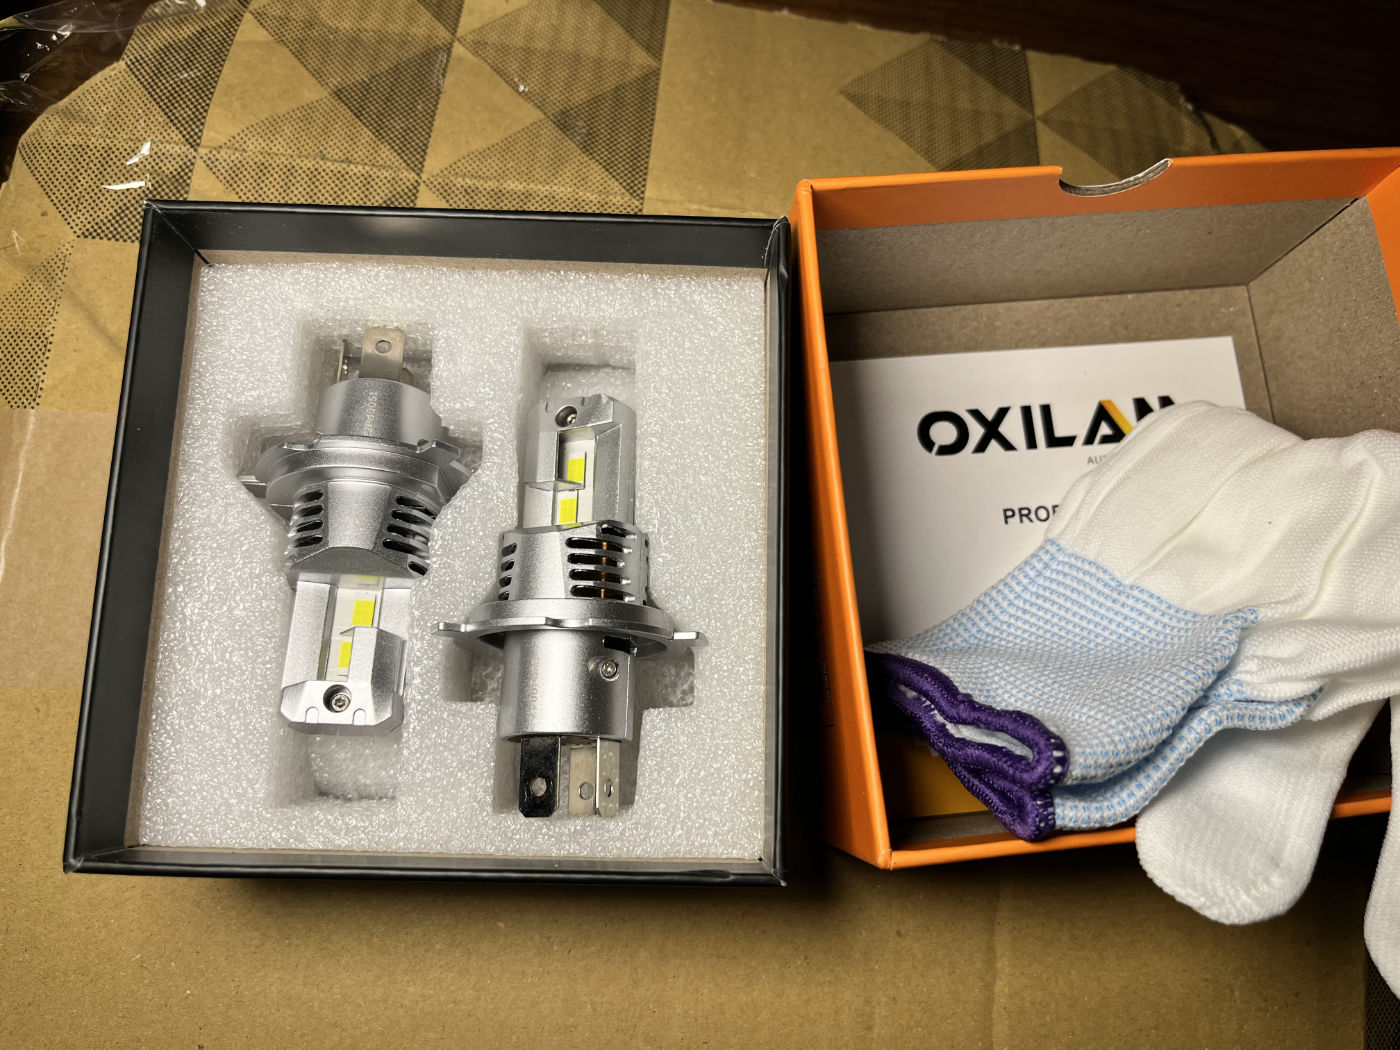 Replace LED OXILAM 03